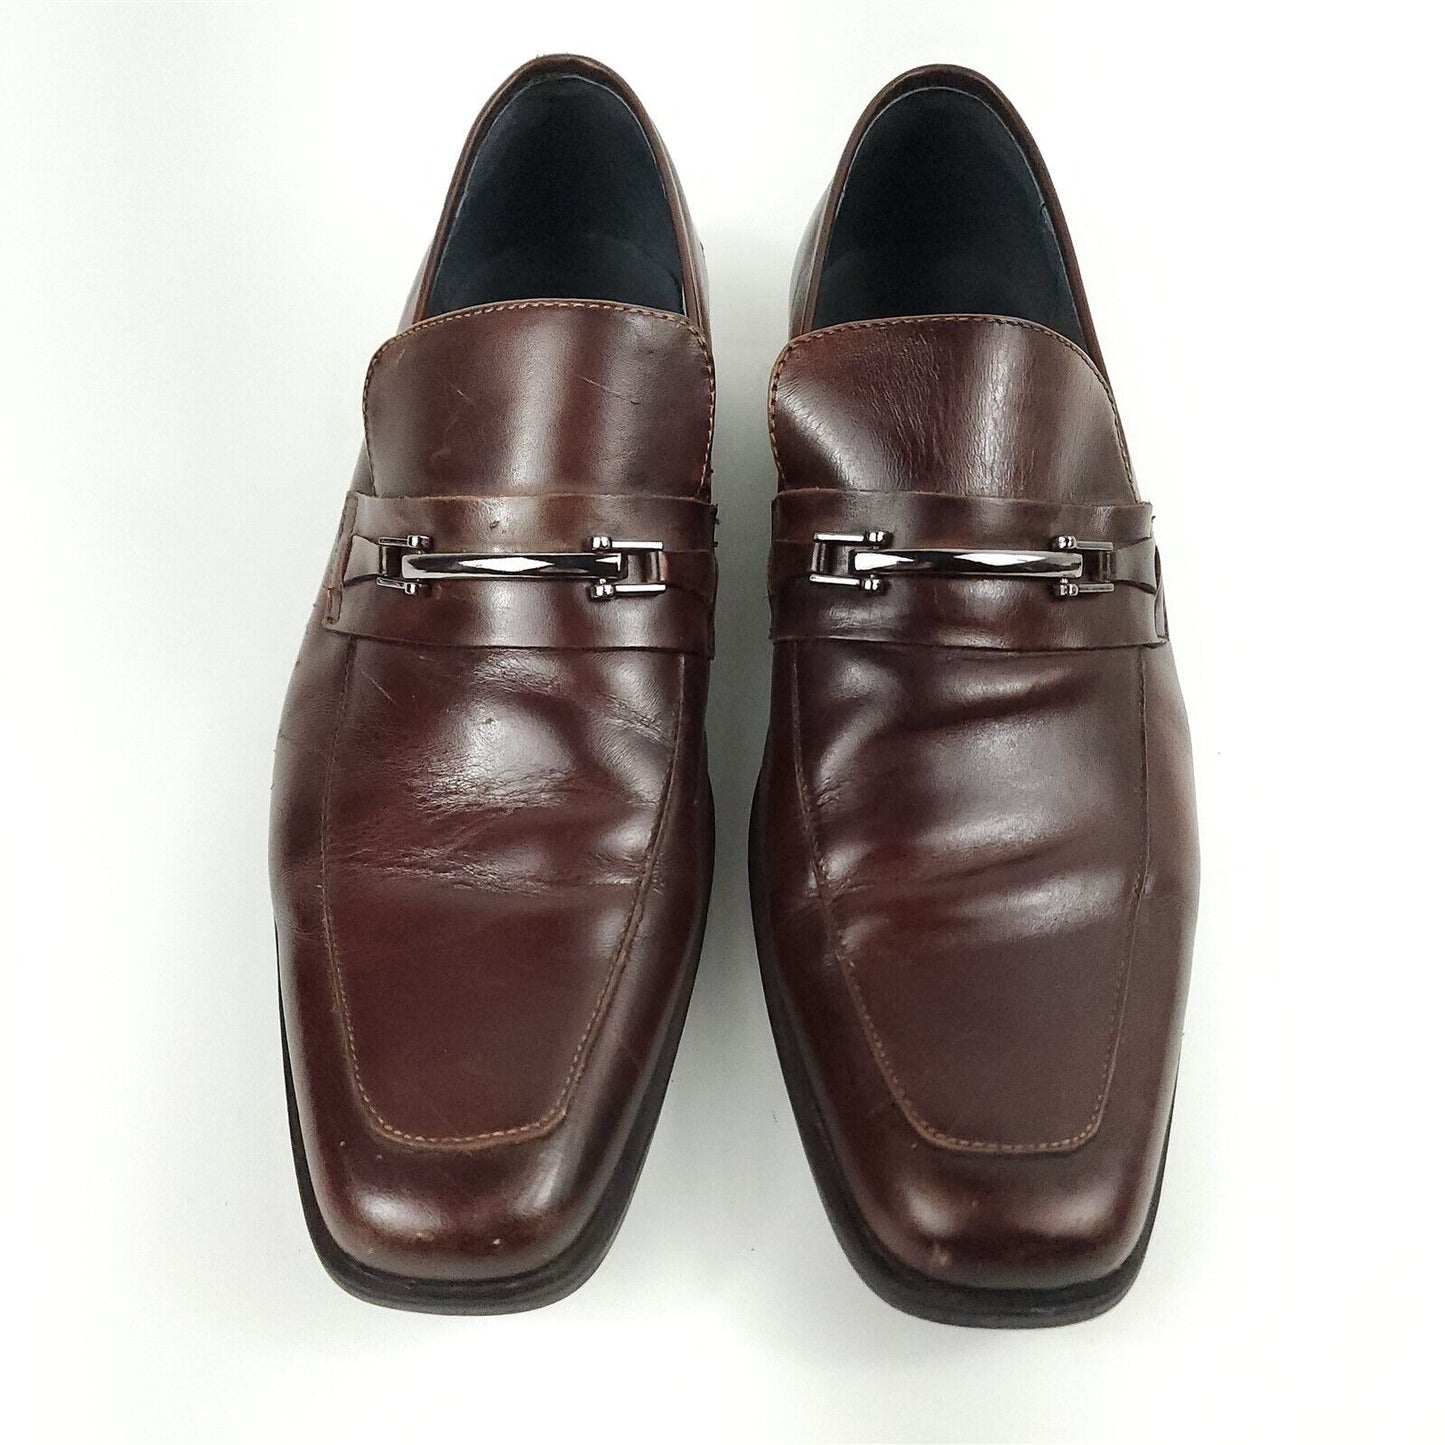 Steve Madden Brown Leather Dress Shoes P-Cal Shoes Mens Size 11